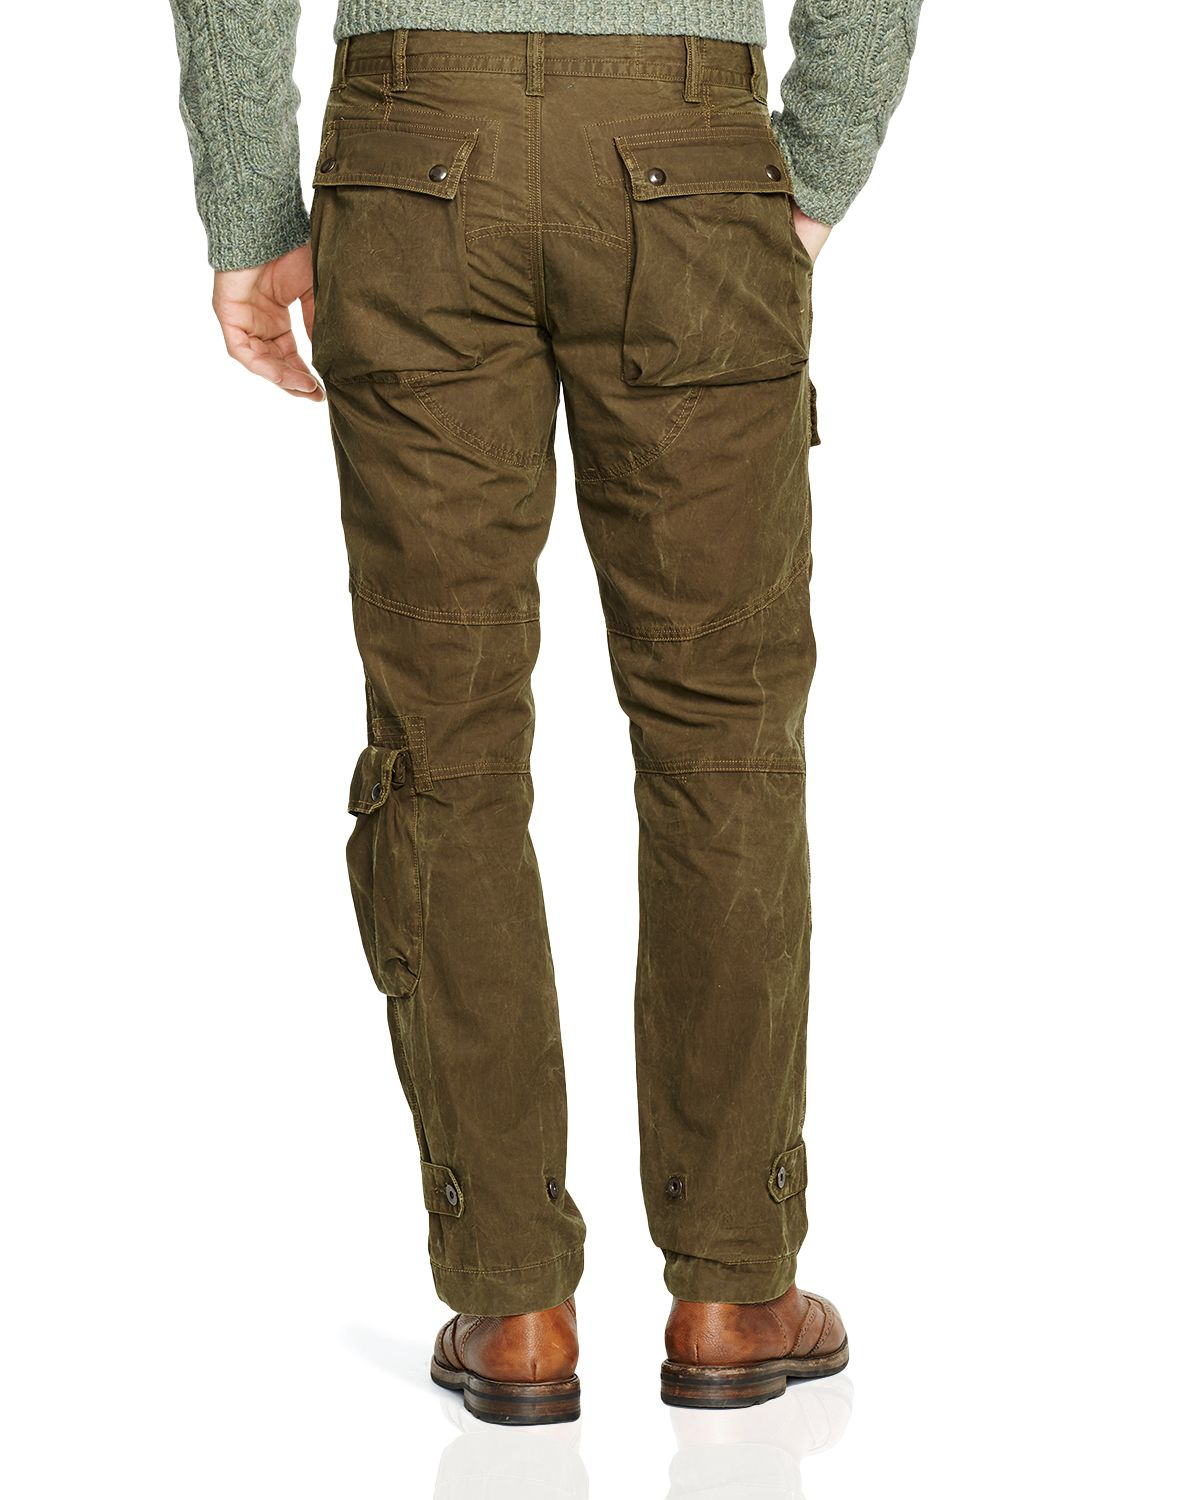 Ralph Lauren Polo Waxed Cotton Canvas Cargo Pants in Brown for Men - Lyst